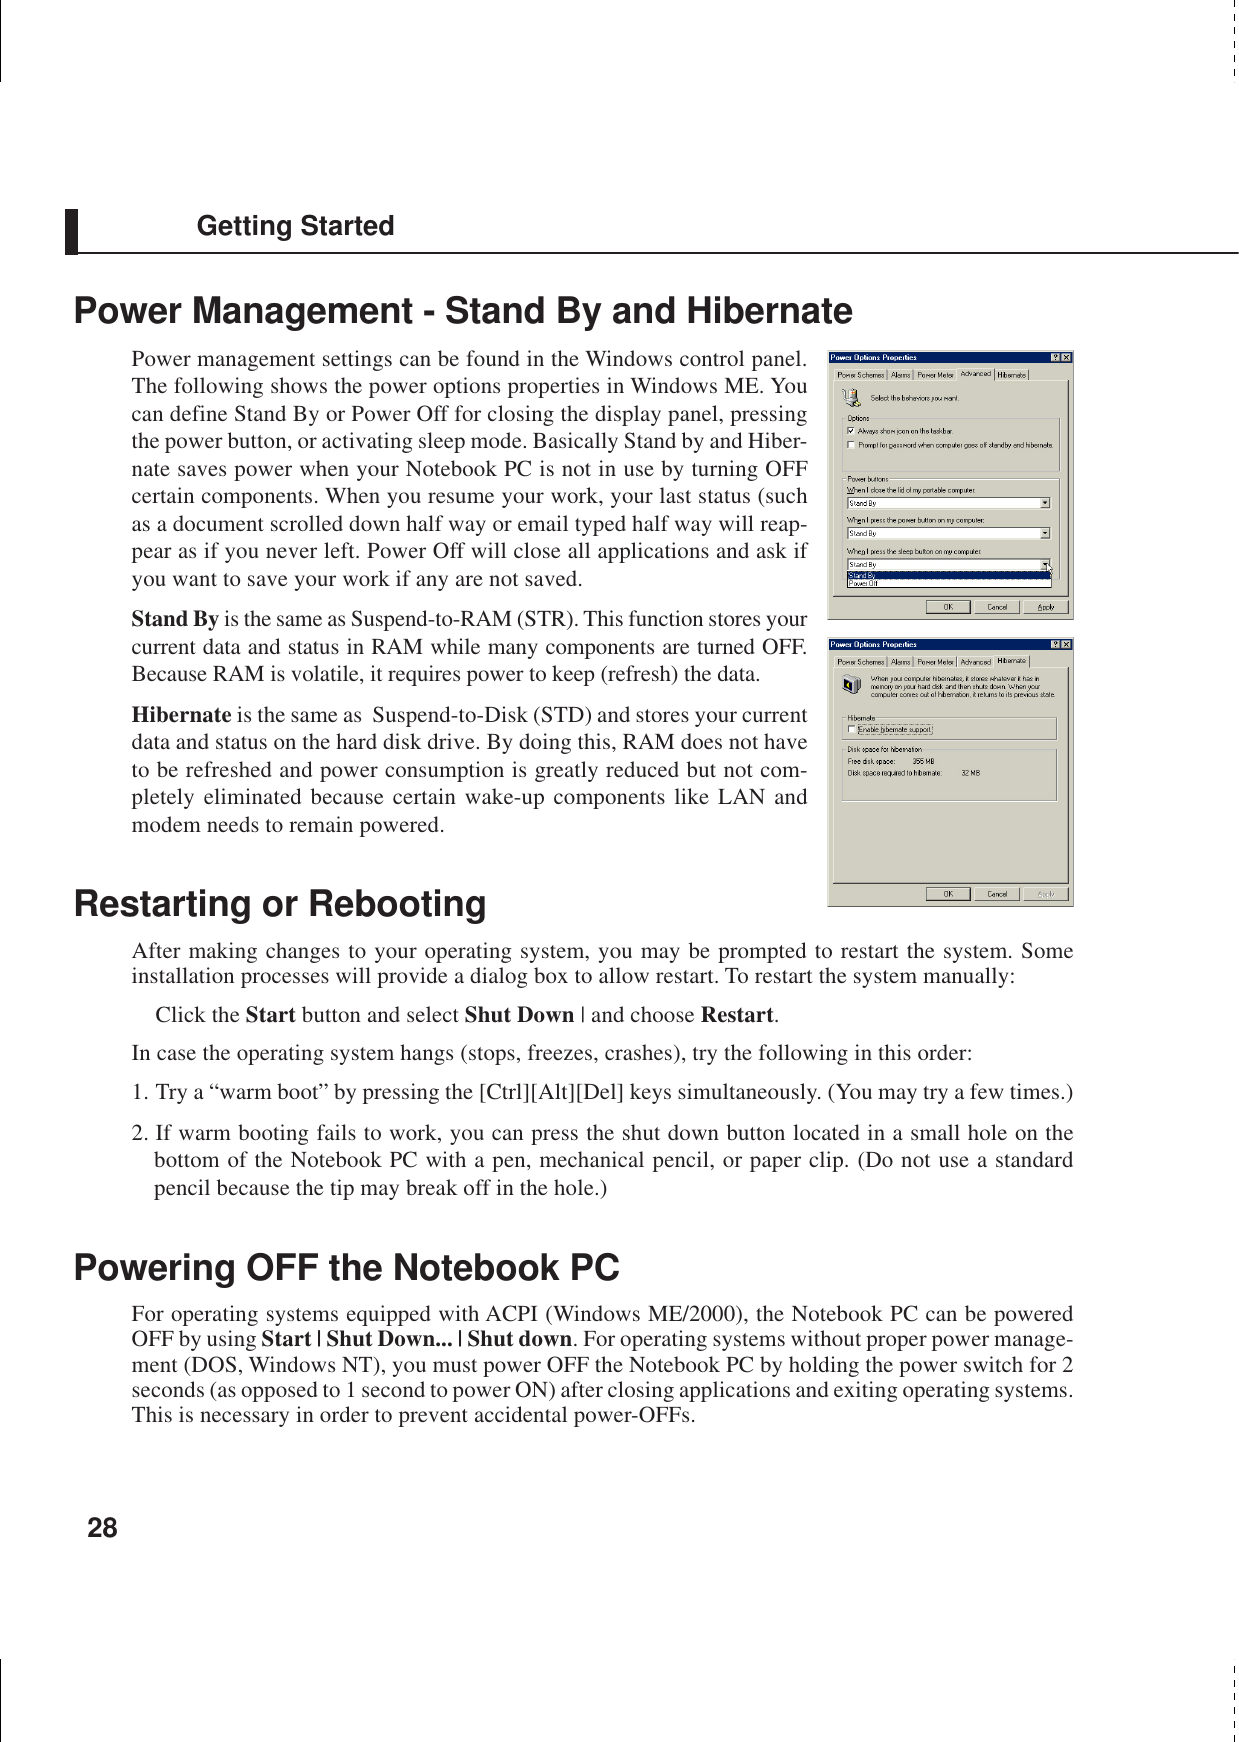 28Getting StartedPower Management - Stand By and HibernatePower management settings can be found in the Windows control panel.The following shows the power options properties in Windows ME. Youcan define Stand By or Power Off for closing the display panel, pressingthe power button, or activating sleep mode. Basically Stand by and Hiber-nate saves power when your Notebook PC is not in use by turning OFFcertain components. When you resume your work, your last status (suchas a document scrolled down half way or email typed half way will reap-pear as if you never left. Power Off will close all applications and ask ifyou want to save your work if any are not saved.Stand By is the same as Suspend-to-RAM (STR). This function stores yourcurrent data and status in RAM while many components are turned OFF.Because RAM is volatile, it requires power to keep (refresh) the data.Hibernate is the same as  Suspend-to-Disk (STD) and stores your currentdata and status on the hard disk drive. By doing this, RAM does not haveto be refreshed and power consumption is greatly reduced but not com-pletely eliminated because certain wake-up components like LAN andmodem needs to remain powered.Restarting or RebootingAfter making changes to your operating system, you may be prompted to restart the system. Someinstallation processes will provide a dialog box to allow restart. To restart the system manually:Click the Start button and select Shut Down | and choose Restart.In case the operating system hangs (stops, freezes, crashes), try the following in this order:1. Try a “warm boot” by pressing the [Ctrl][Alt][Del] keys simultaneously. (You may try a few times.)2. If warm booting fails to work, you can press the shut down button located in a small hole on thebottom of the Notebook PC with a pen, mechanical pencil, or paper clip. (Do not use a standardpencil because the tip may break off in the hole.)Powering OFF the Notebook PCFor operating systems equipped with ACPI (Windows ME/2000), the Notebook PC can be poweredOFF by using Start | Shut Down... | Shut down. For operating systems without proper power manage-ment (DOS, Windows NT), you must power OFF the Notebook PC by holding the power switch for 2seconds (as opposed to 1 second to power ON) after closing applications and exiting operating systems.This is necessary in order to prevent accidental power-OFFs.